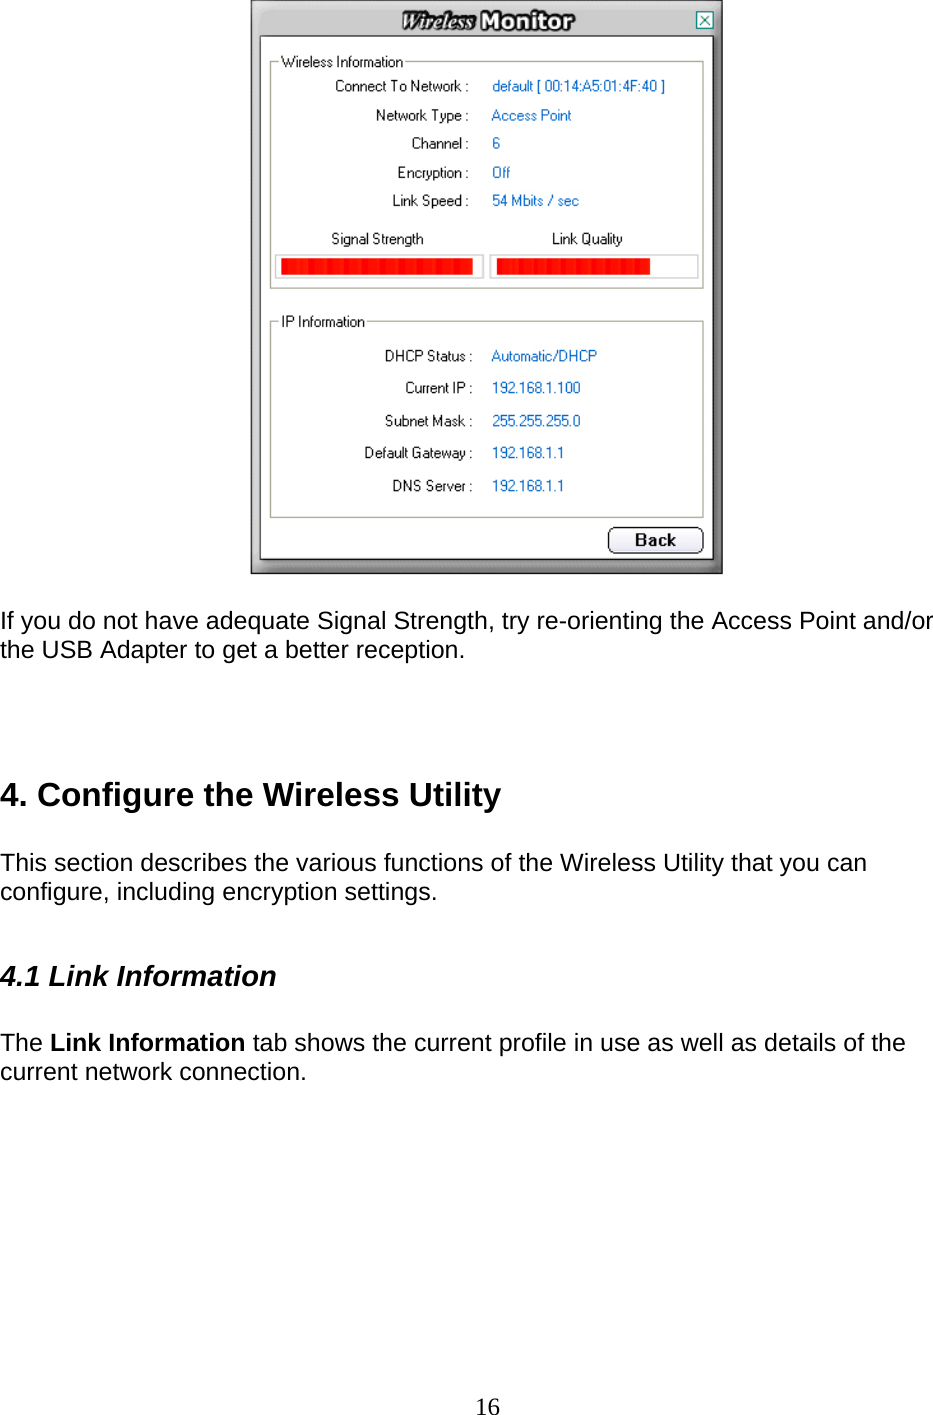 16   If you do not have adequate Signal Strength, try re-orienting the Access Point and/or the USB Adapter to get a better reception.    4. Configure the Wireless Utility  This section describes the various functions of the Wireless Utility that you can configure, including encryption settings.  4.1 Link Information  The Link Information tab shows the current profile in use as well as details of the current network connection.  